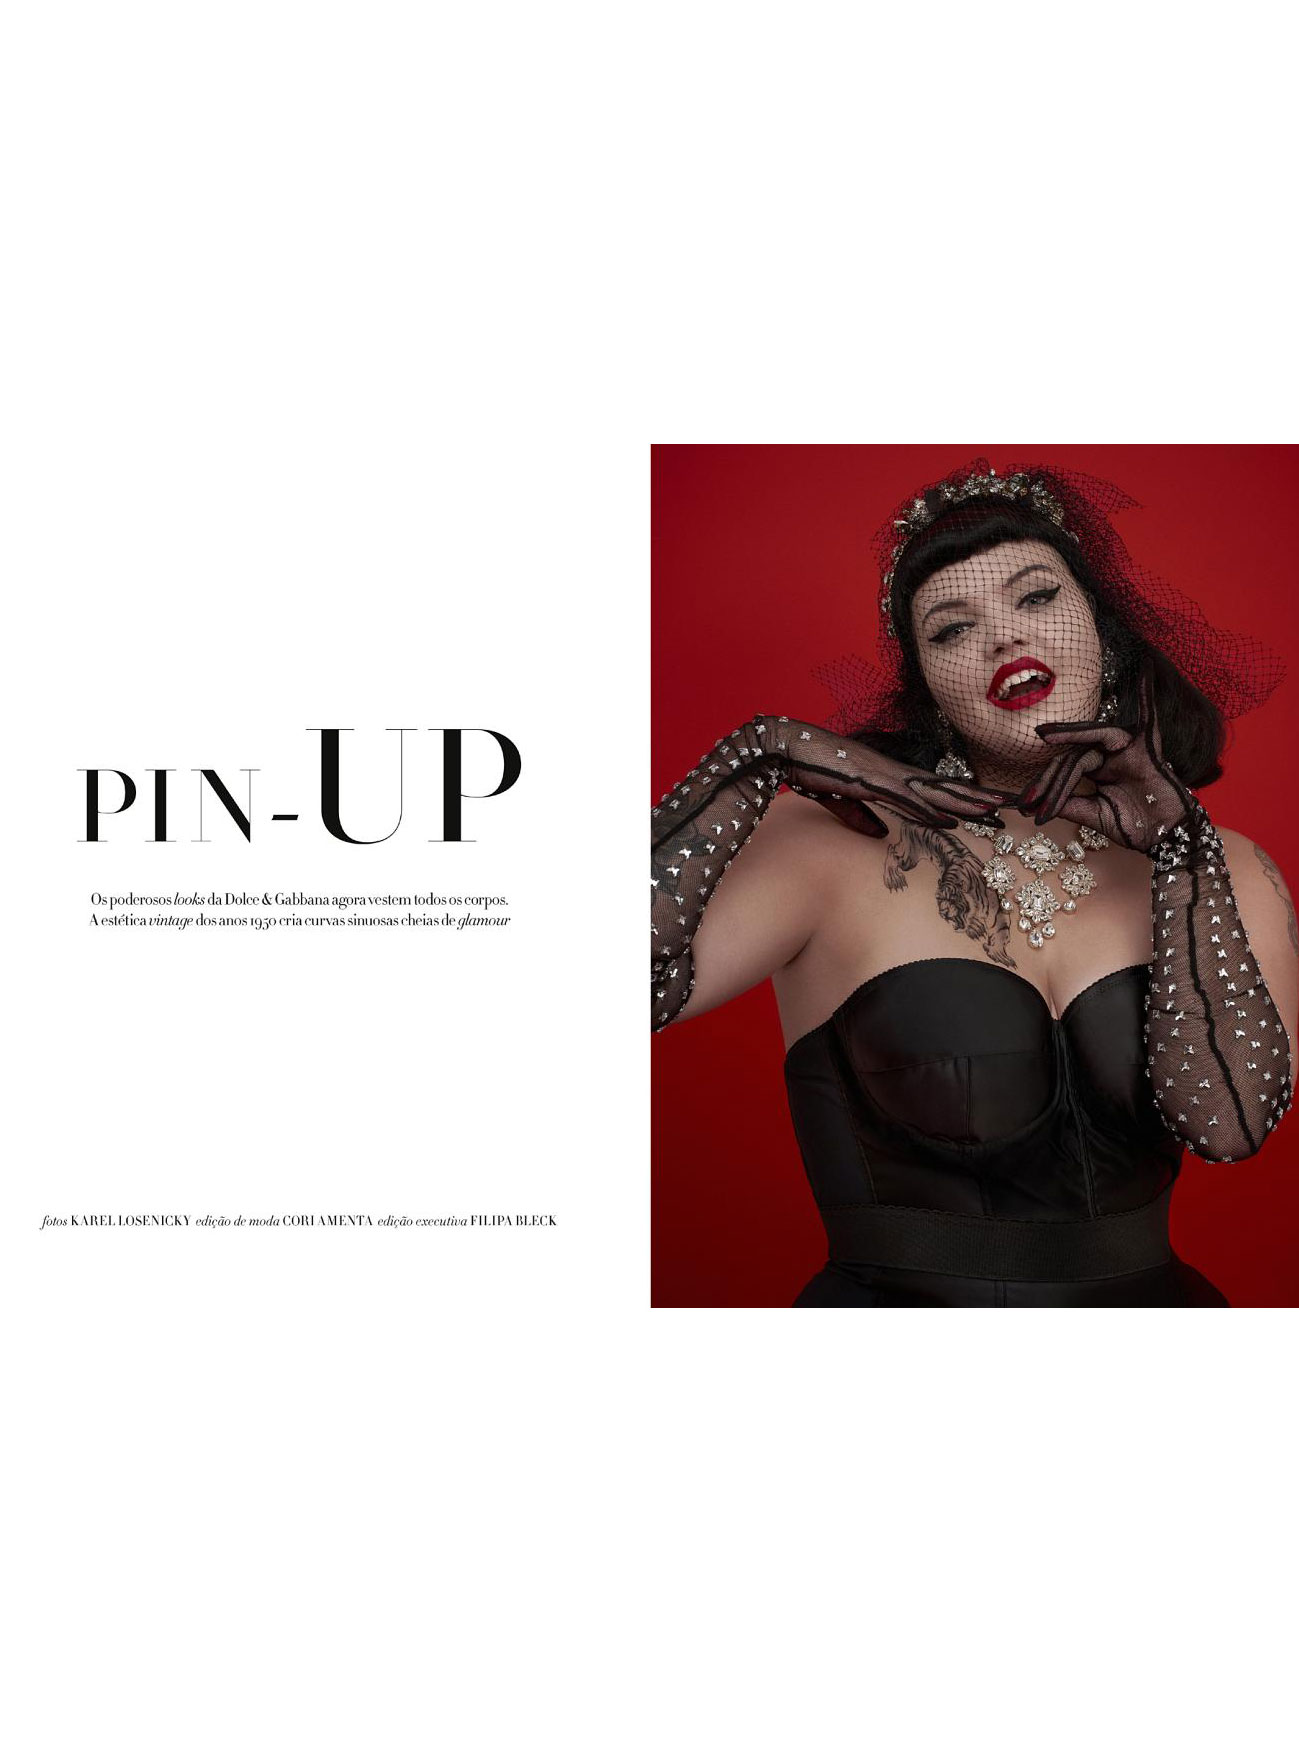 CoqCreative power by ProductionLink s.r.l. Harper s Bazaar - Pin UP Harper-s-Bazaar---Pin-UP  Harper s Bazaar - Pin UP